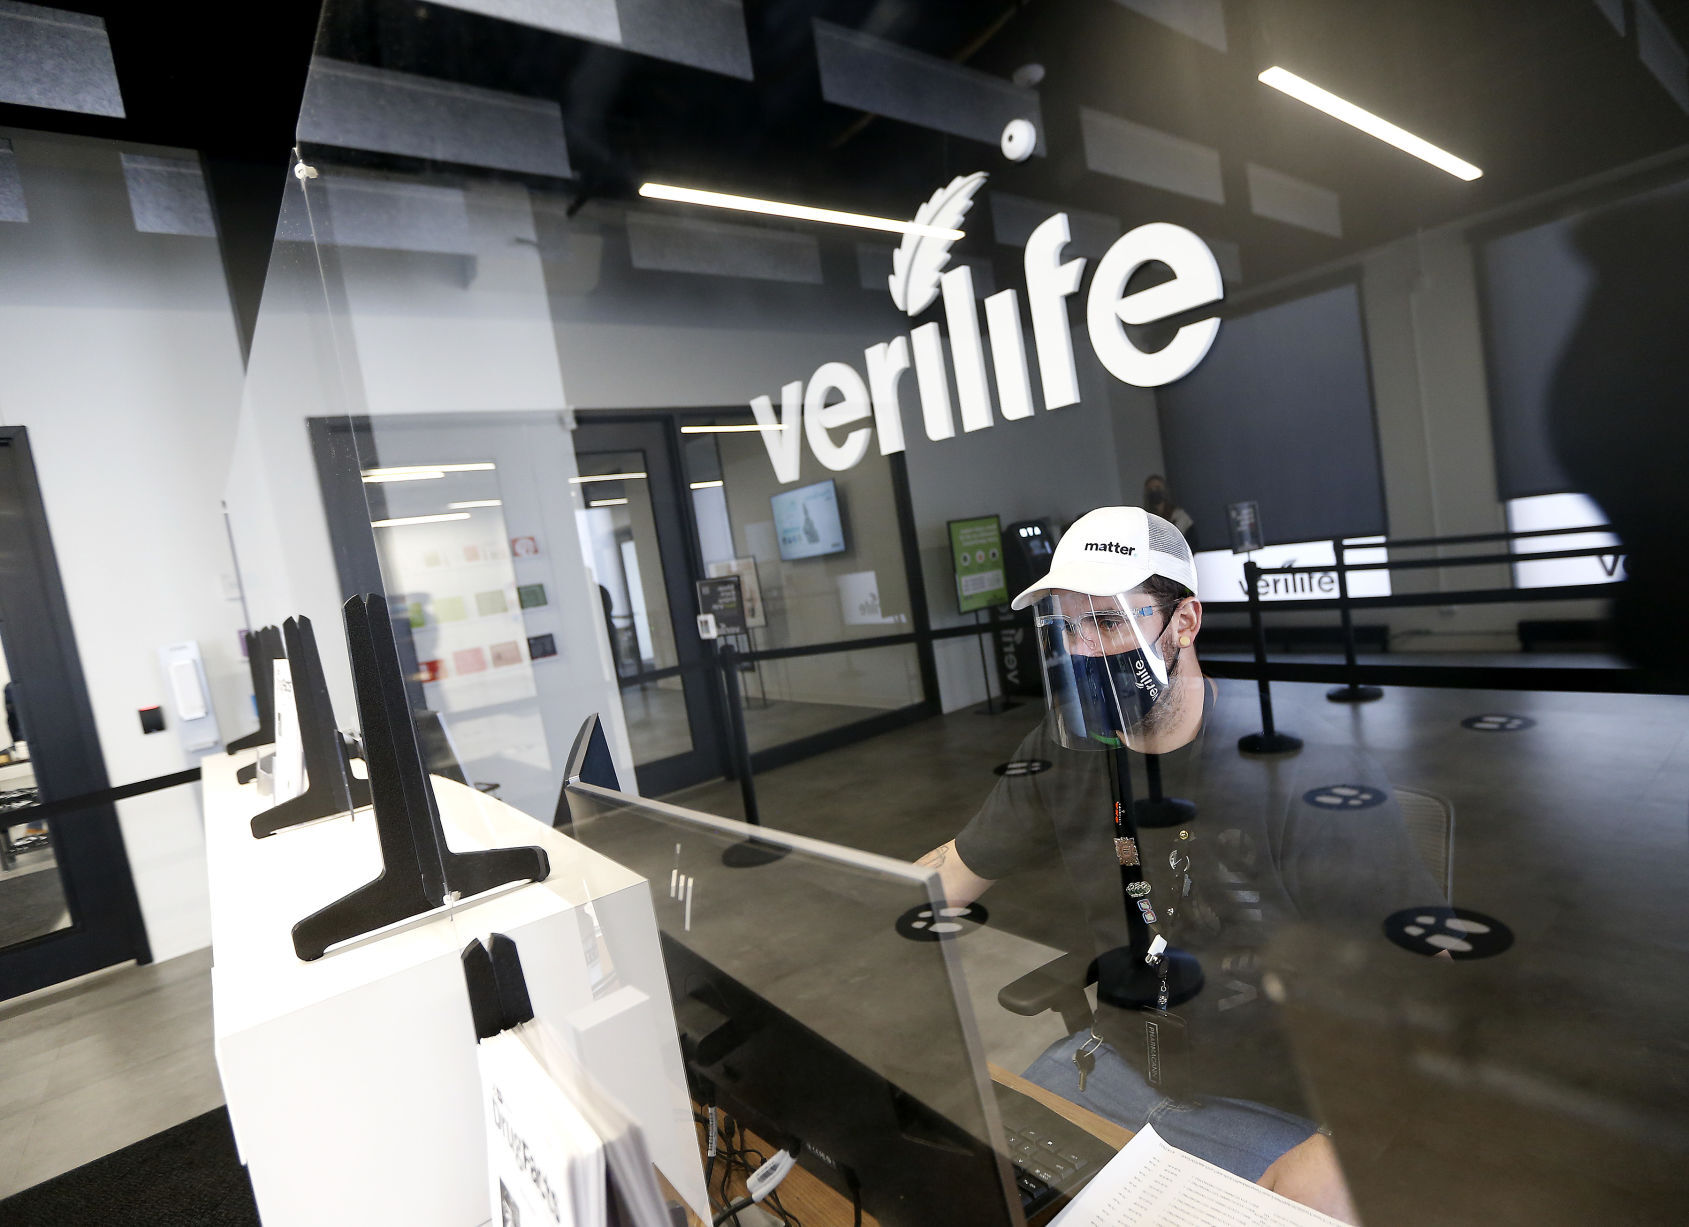 Sean Carter, associate with Verilife in Galena, Ill., works at the front desk of the dispensary on Wednesday. The Galena cannabis dispensary, part of a chain operated by PharmaCann, opened on March 6. PHOTO CREDIT: Dave Kettering